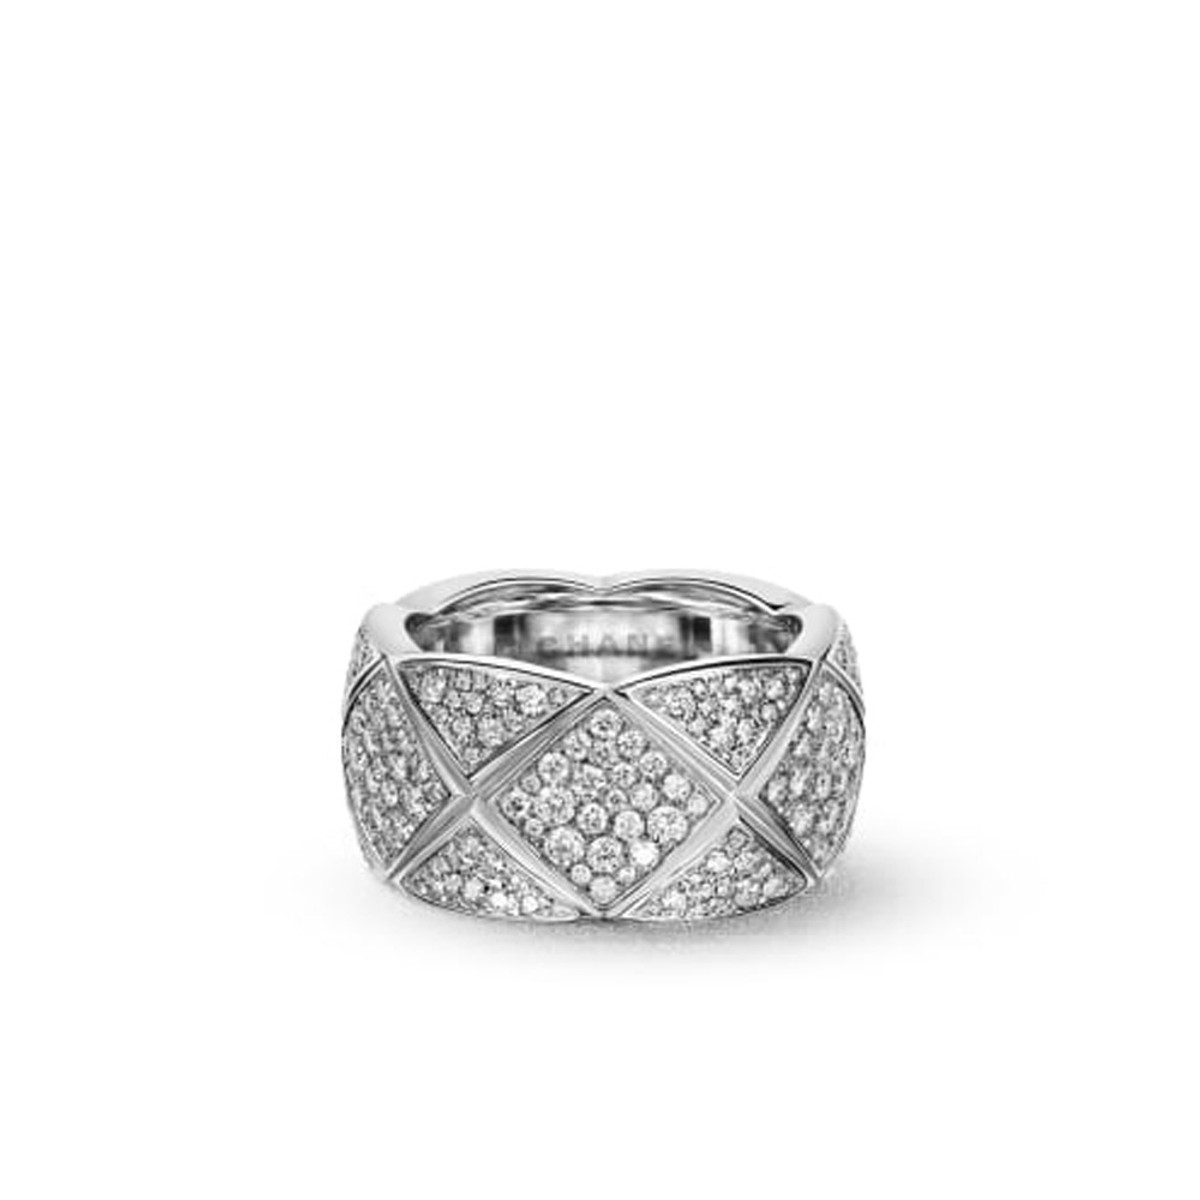 Chanel 18K White Gold Coco Crush Diamond Ring-29632 Product Image